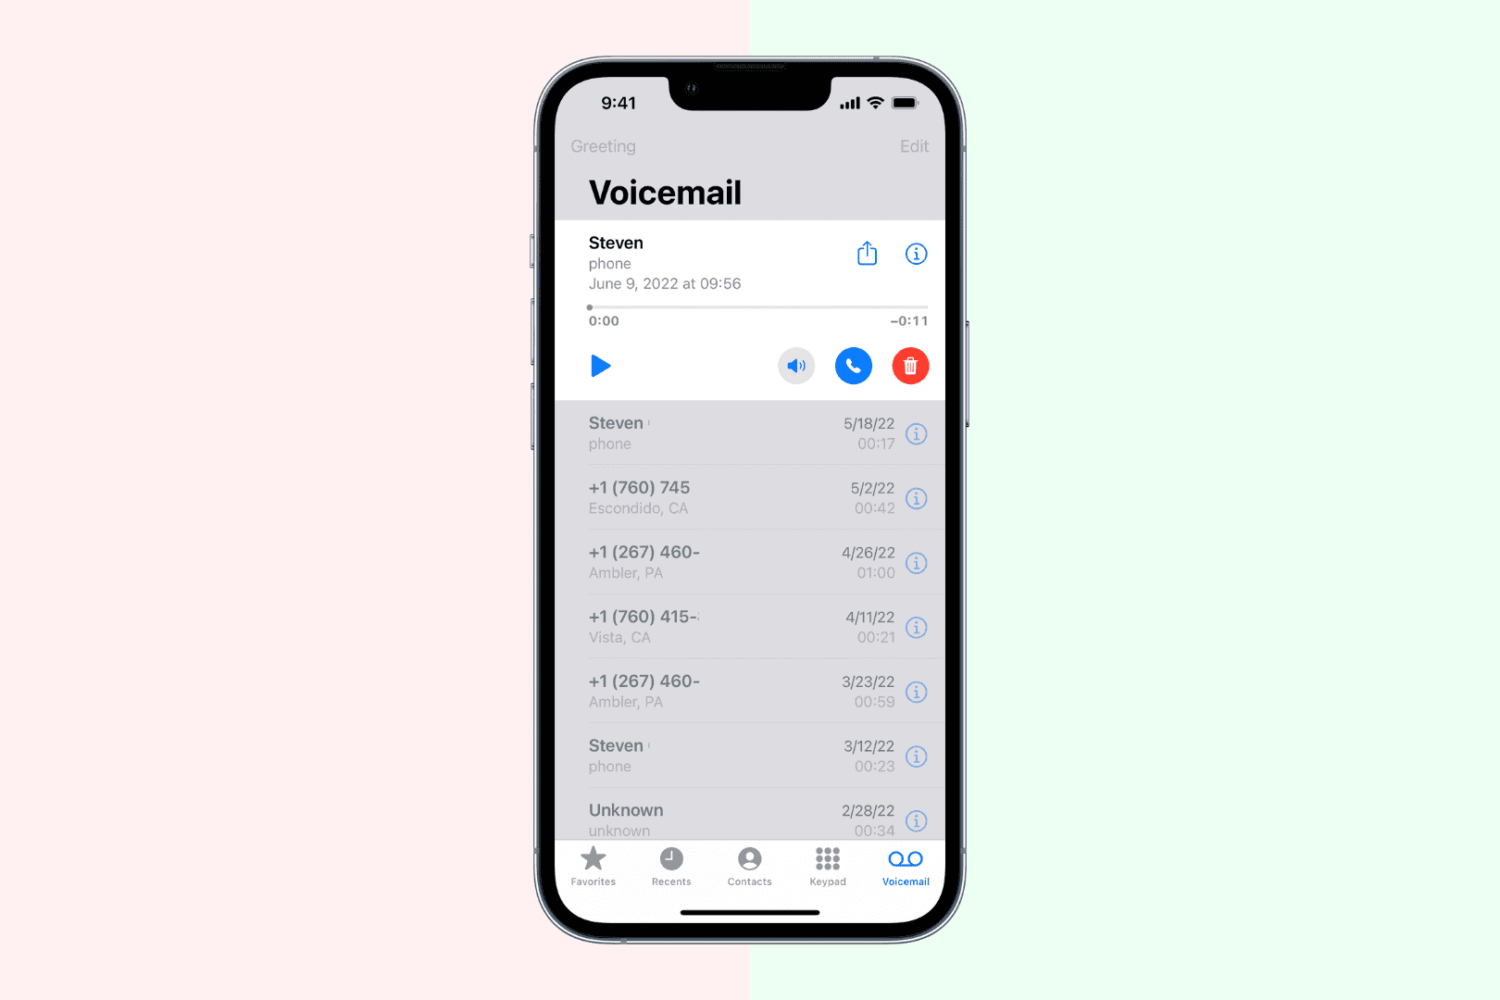 Voicemail screen on iPhone